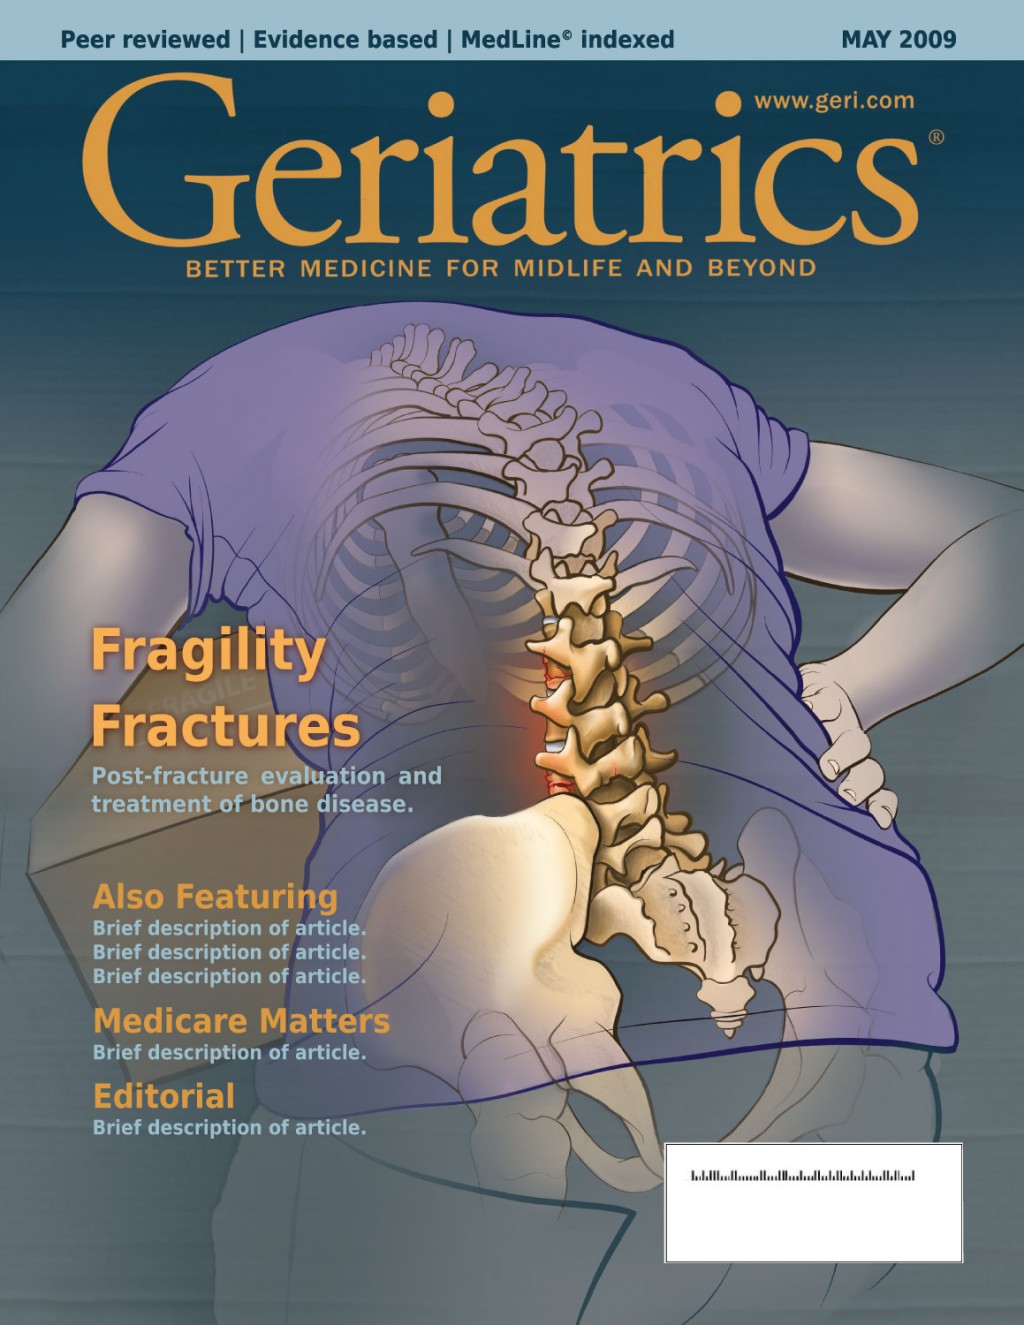 Geriatrics Magazine Mock-up. With a full-color illustration showing a fragility fracture in an elderly patient.